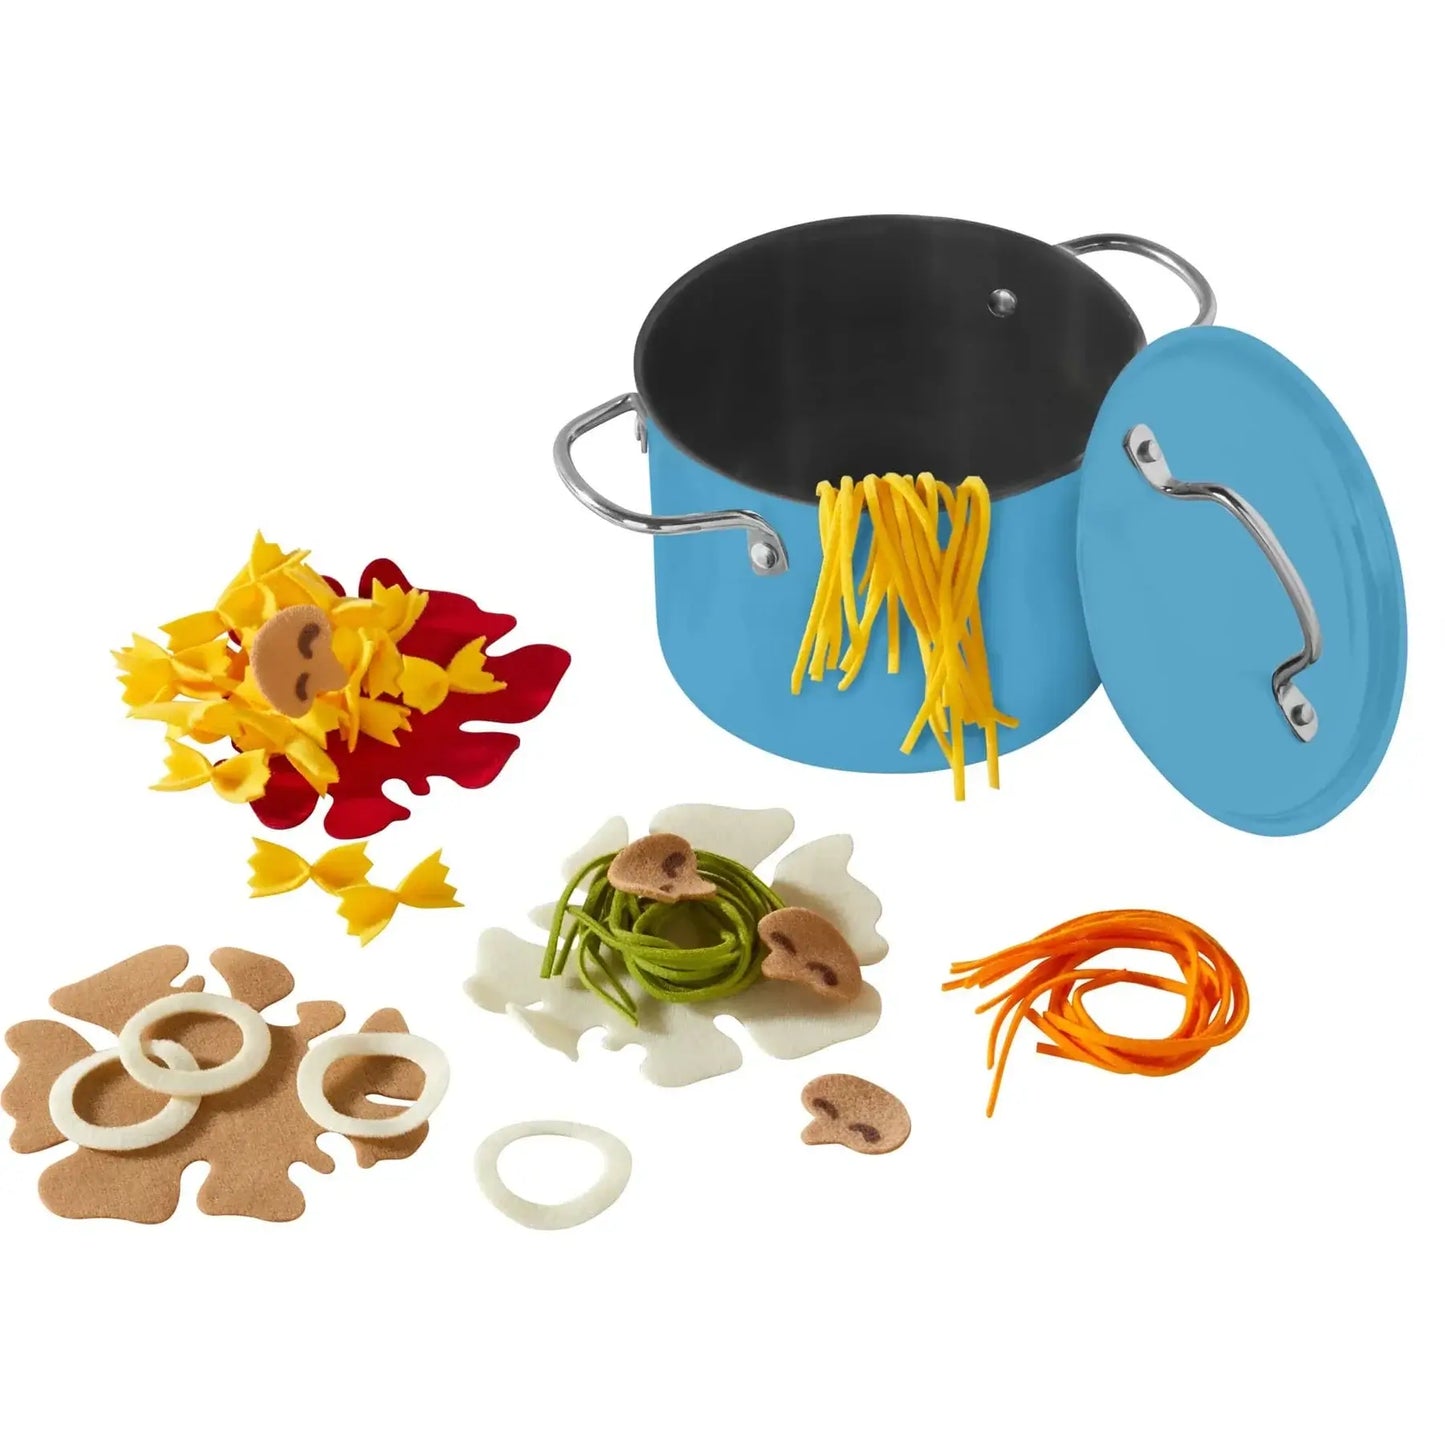 Cooking Set Cloth Pasta Time Play Food